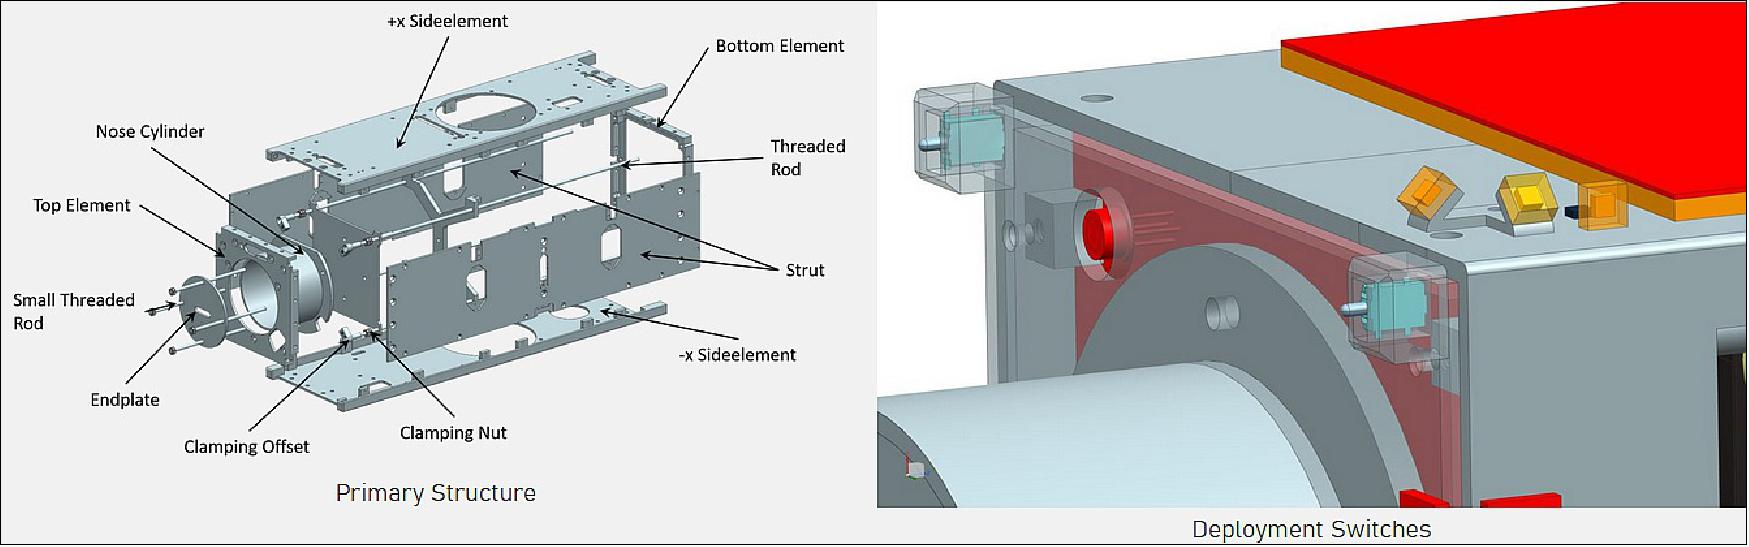 Figure 8: Illustration of the primary structure and the deployment switches (image credit: SOURCE collaboration)